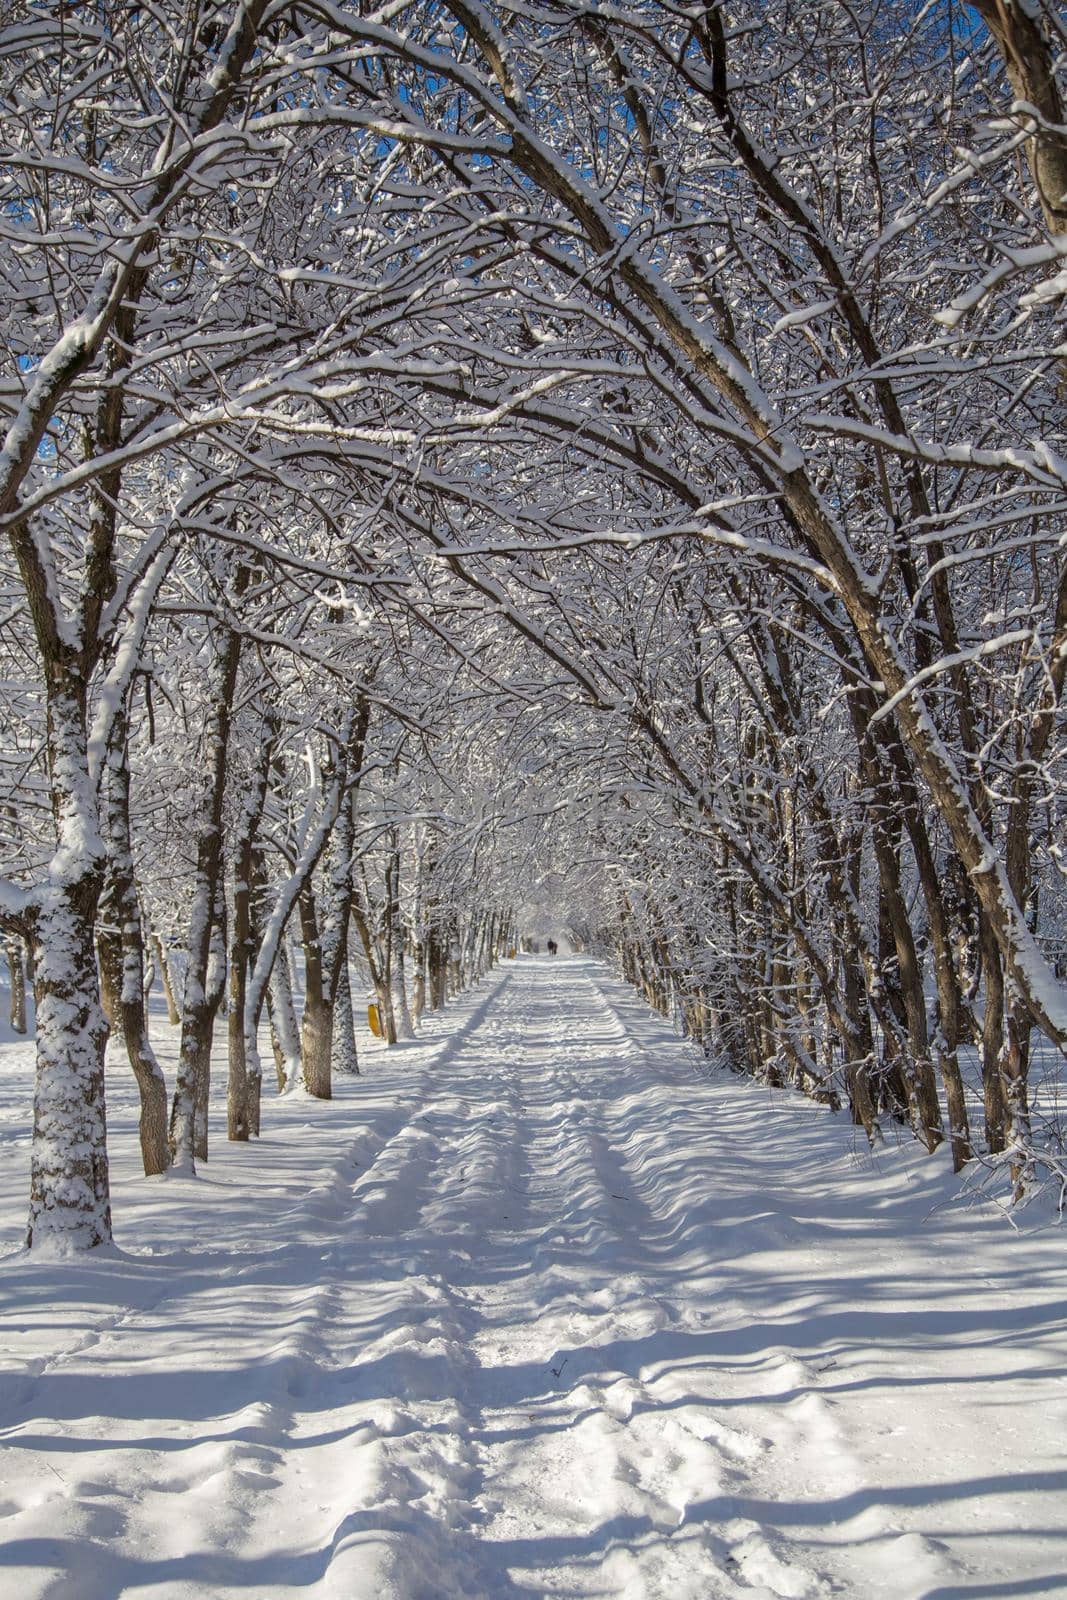 Thin branches of trees bent over the path. Winter road covered with snow extending into the distance. Curved plant trunks form a living arch.